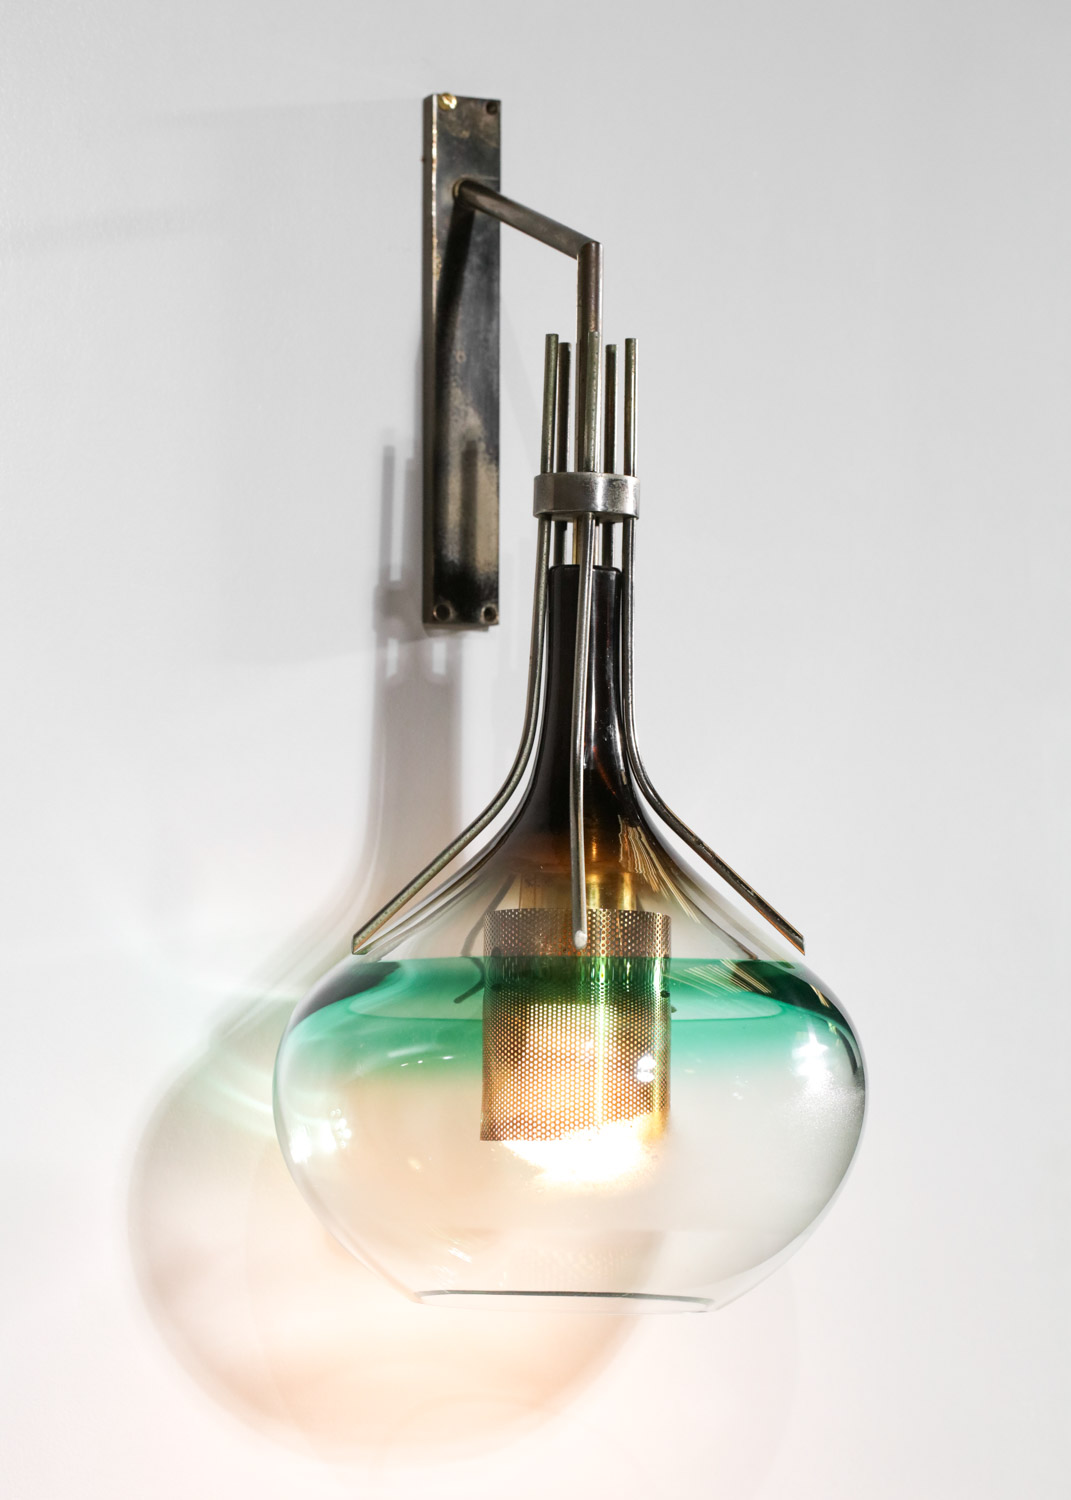 Pair of scandinavian sconces smoked glass and nickel plated steel 